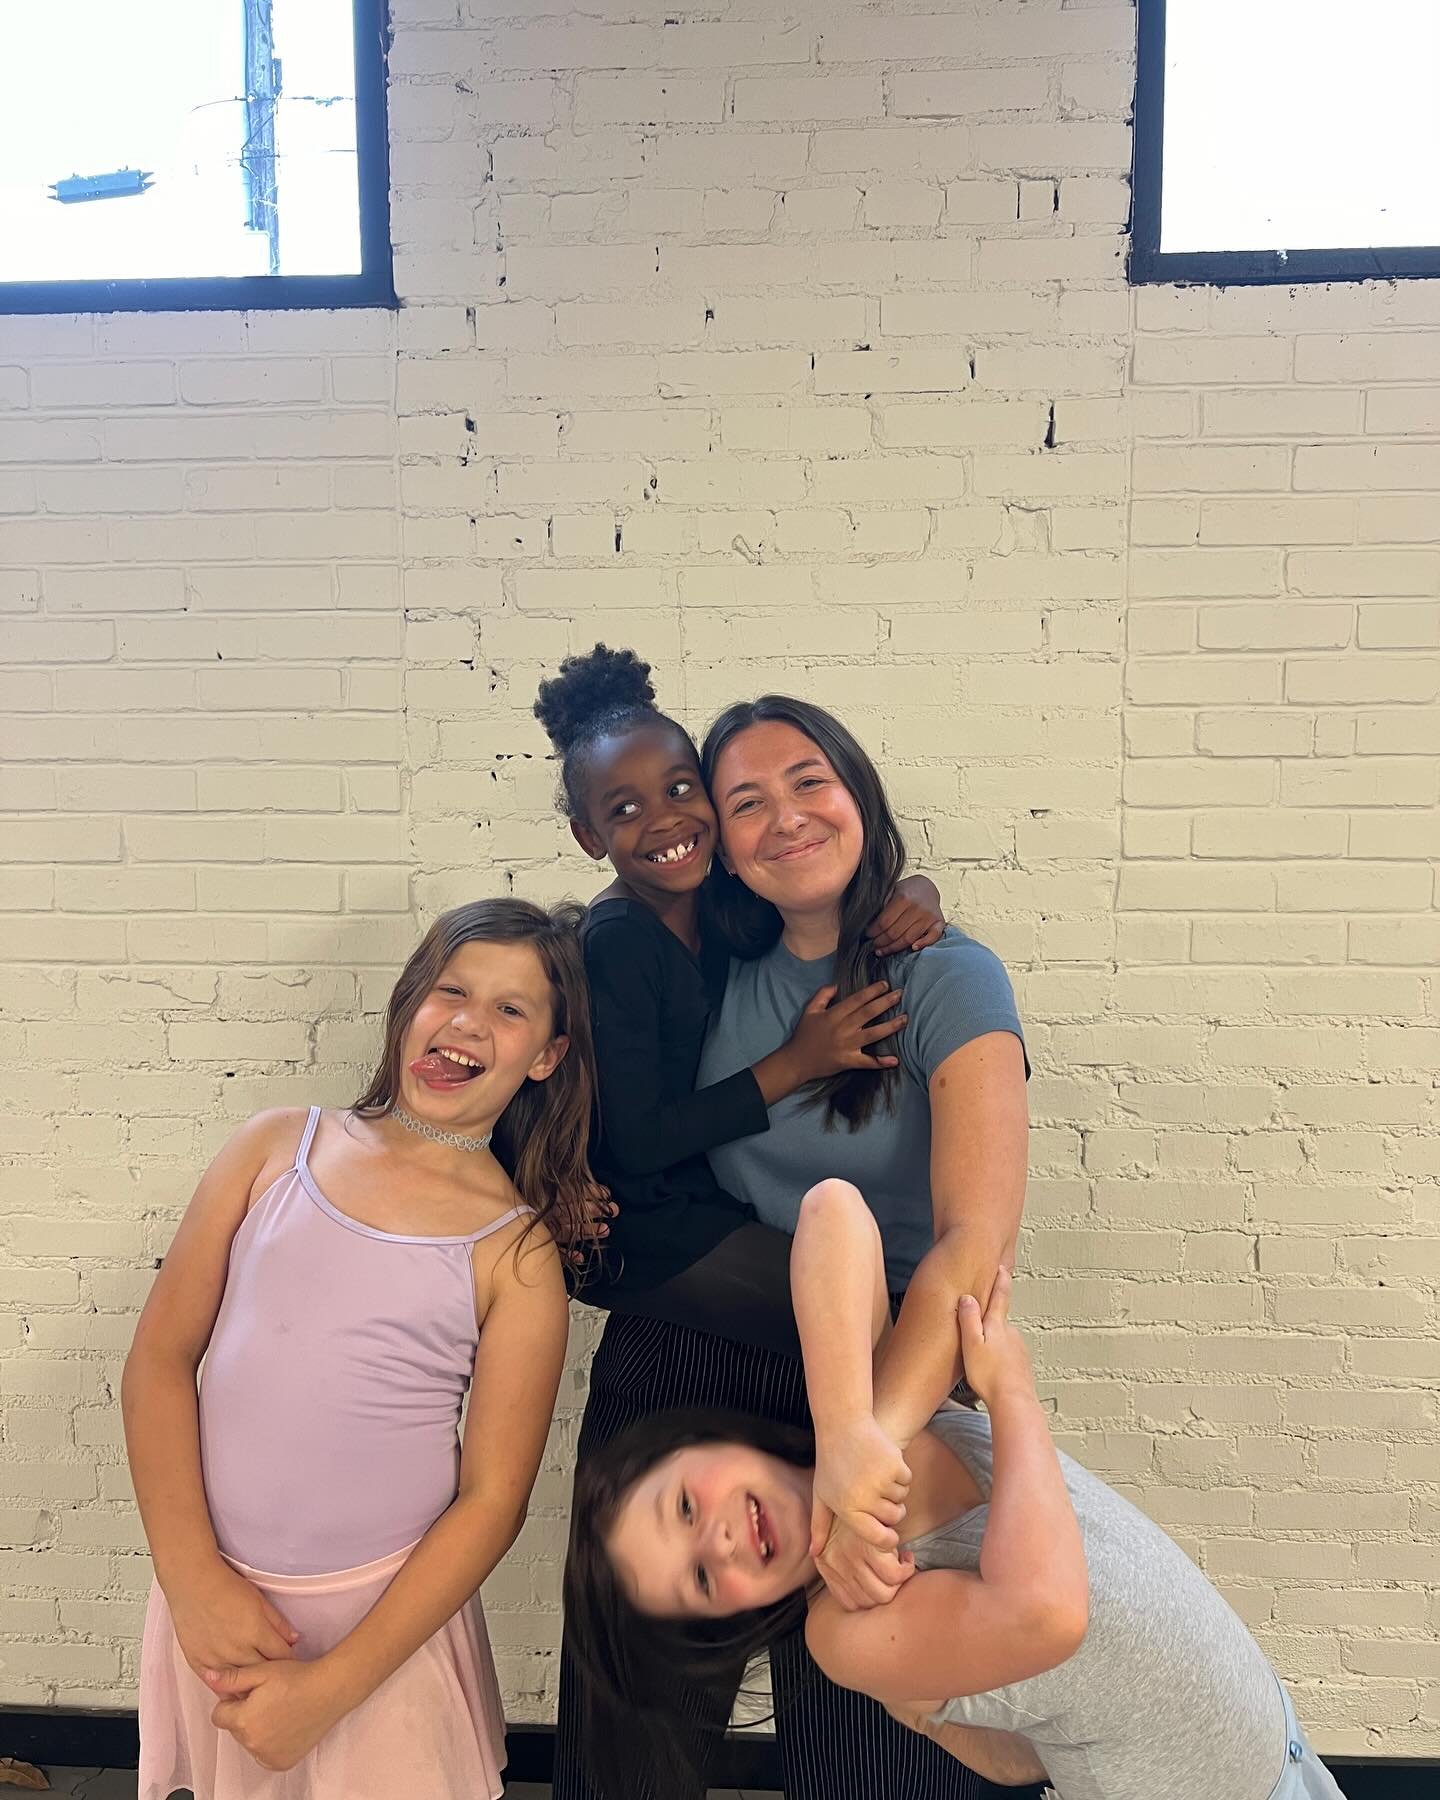 Shout out to our sweet volunteer, Ainsley! We are so thankful for the love you give to these sweet and silly girls&hellip; safe to say they LOVE you! 💕